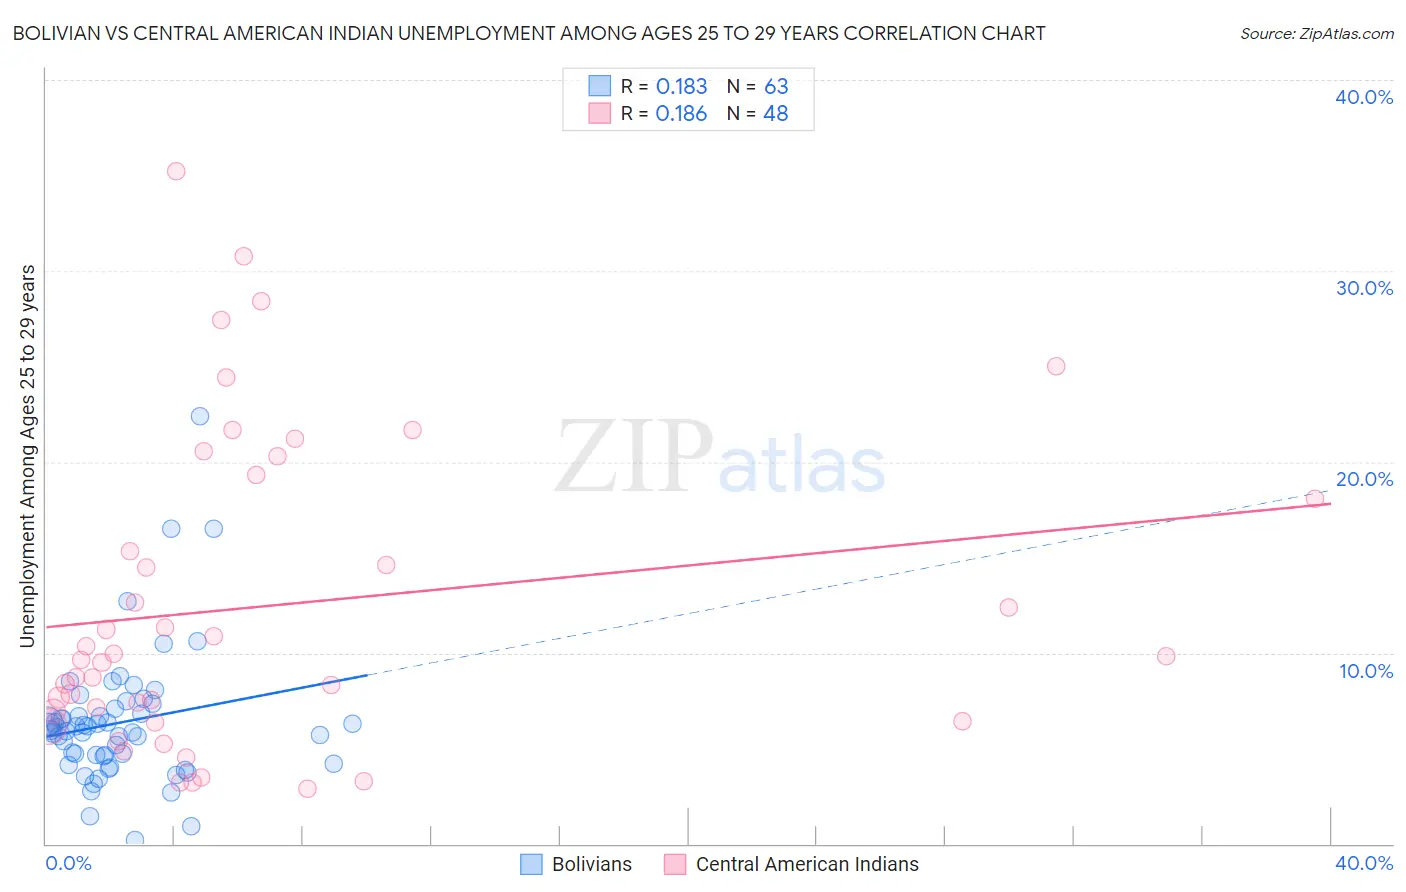 Bolivian vs Central American Indian Unemployment Among Ages 25 to 29 years